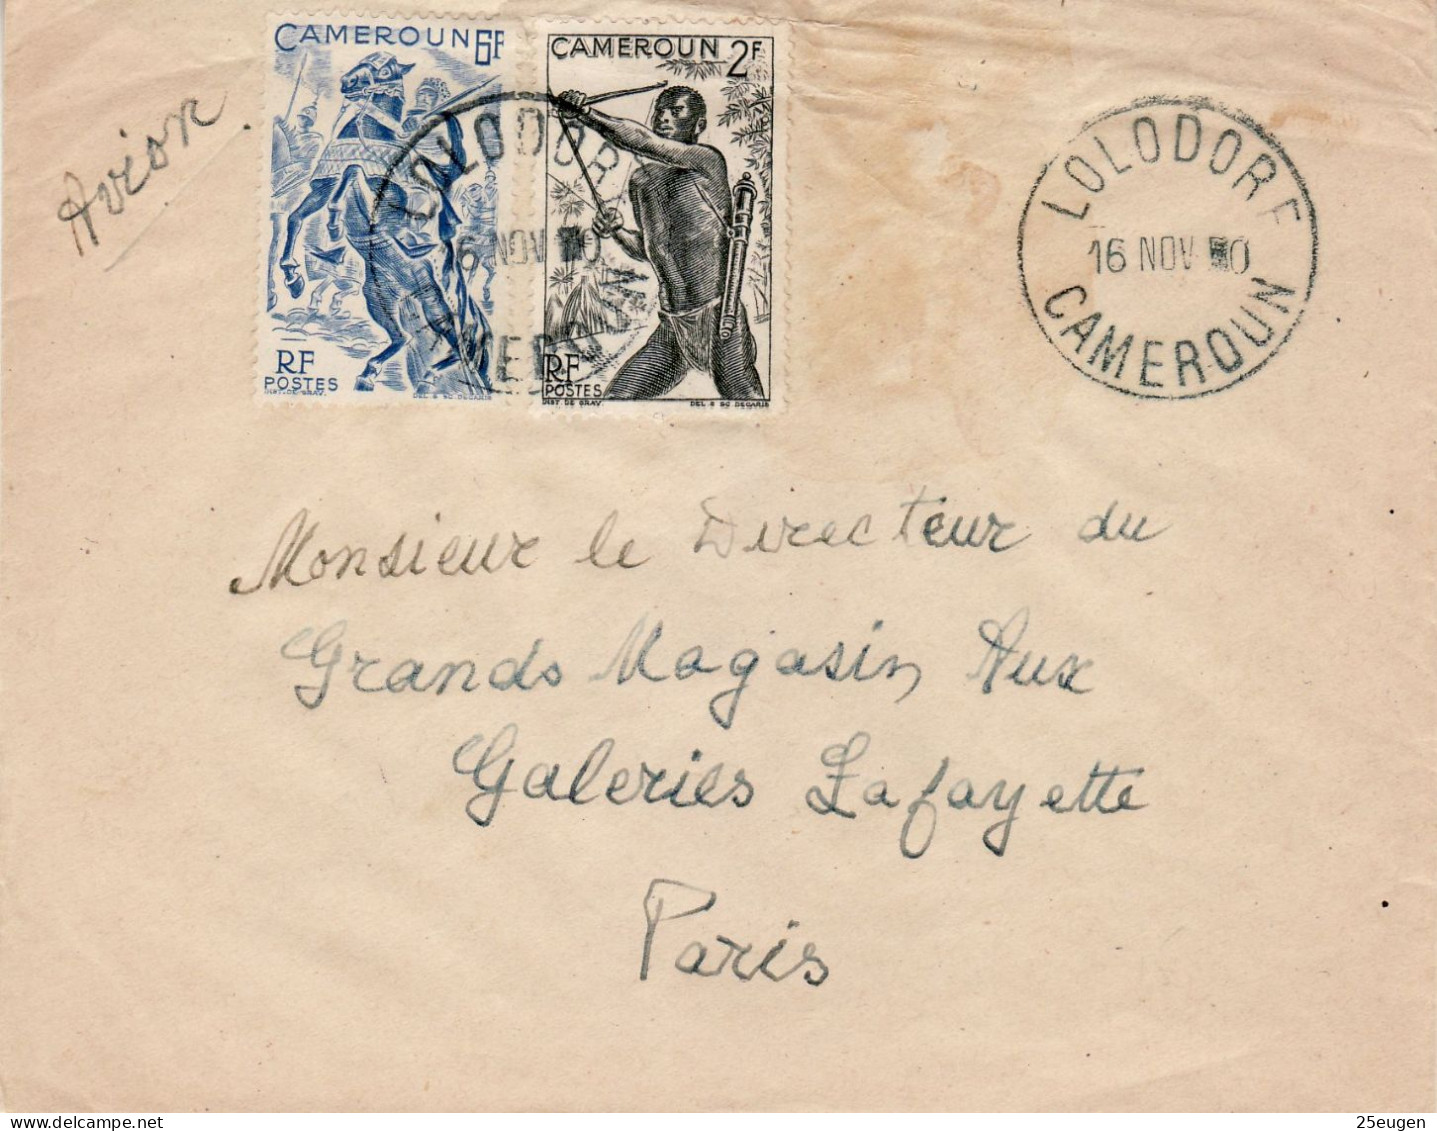 CAMEROUN 1950 AIRMAIL LETTER SENT FROM LOLODORE TO PARIS - Briefe U. Dokumente